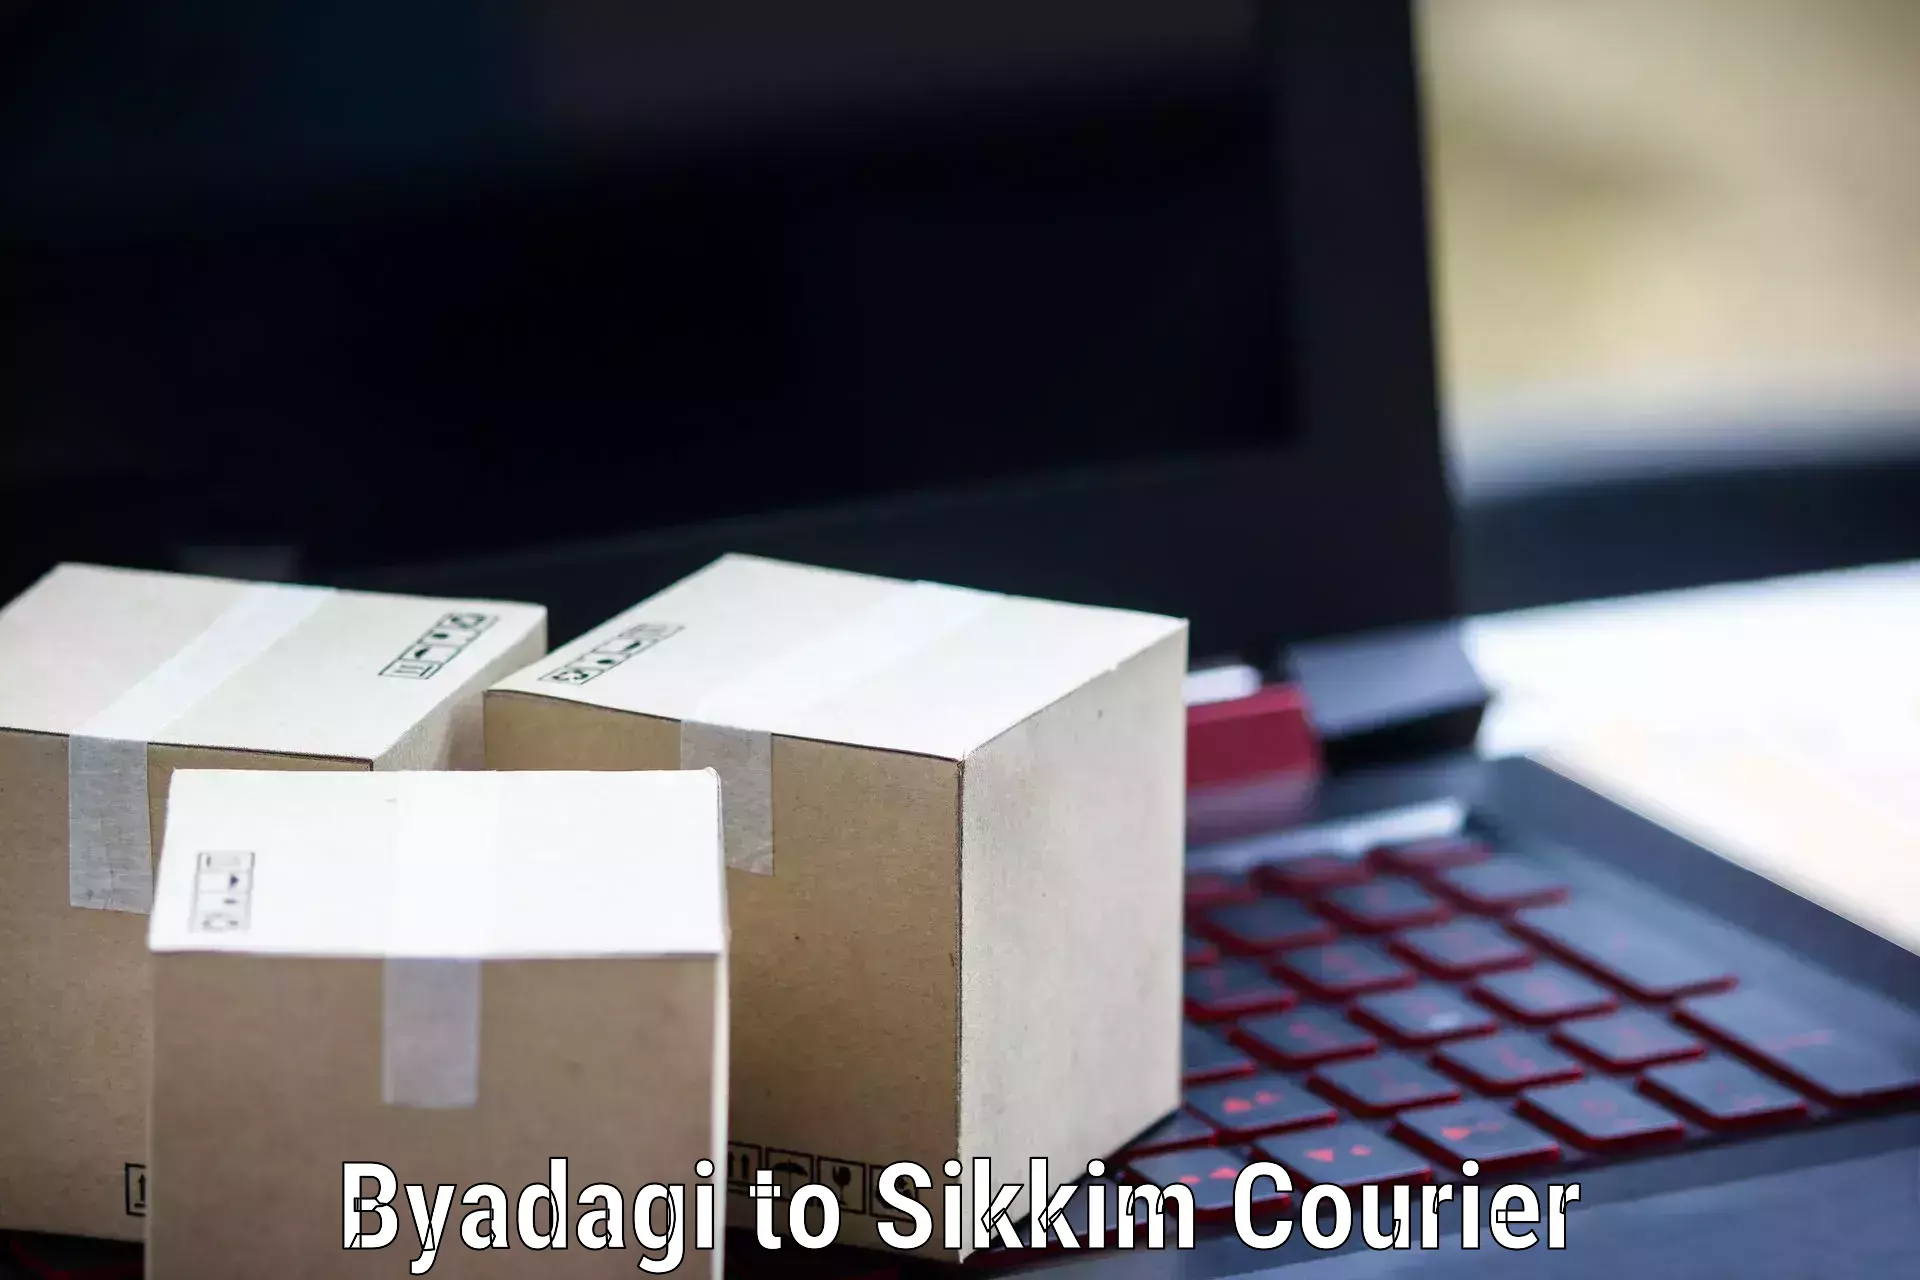 Courier service comparison Byadagi to East Sikkim